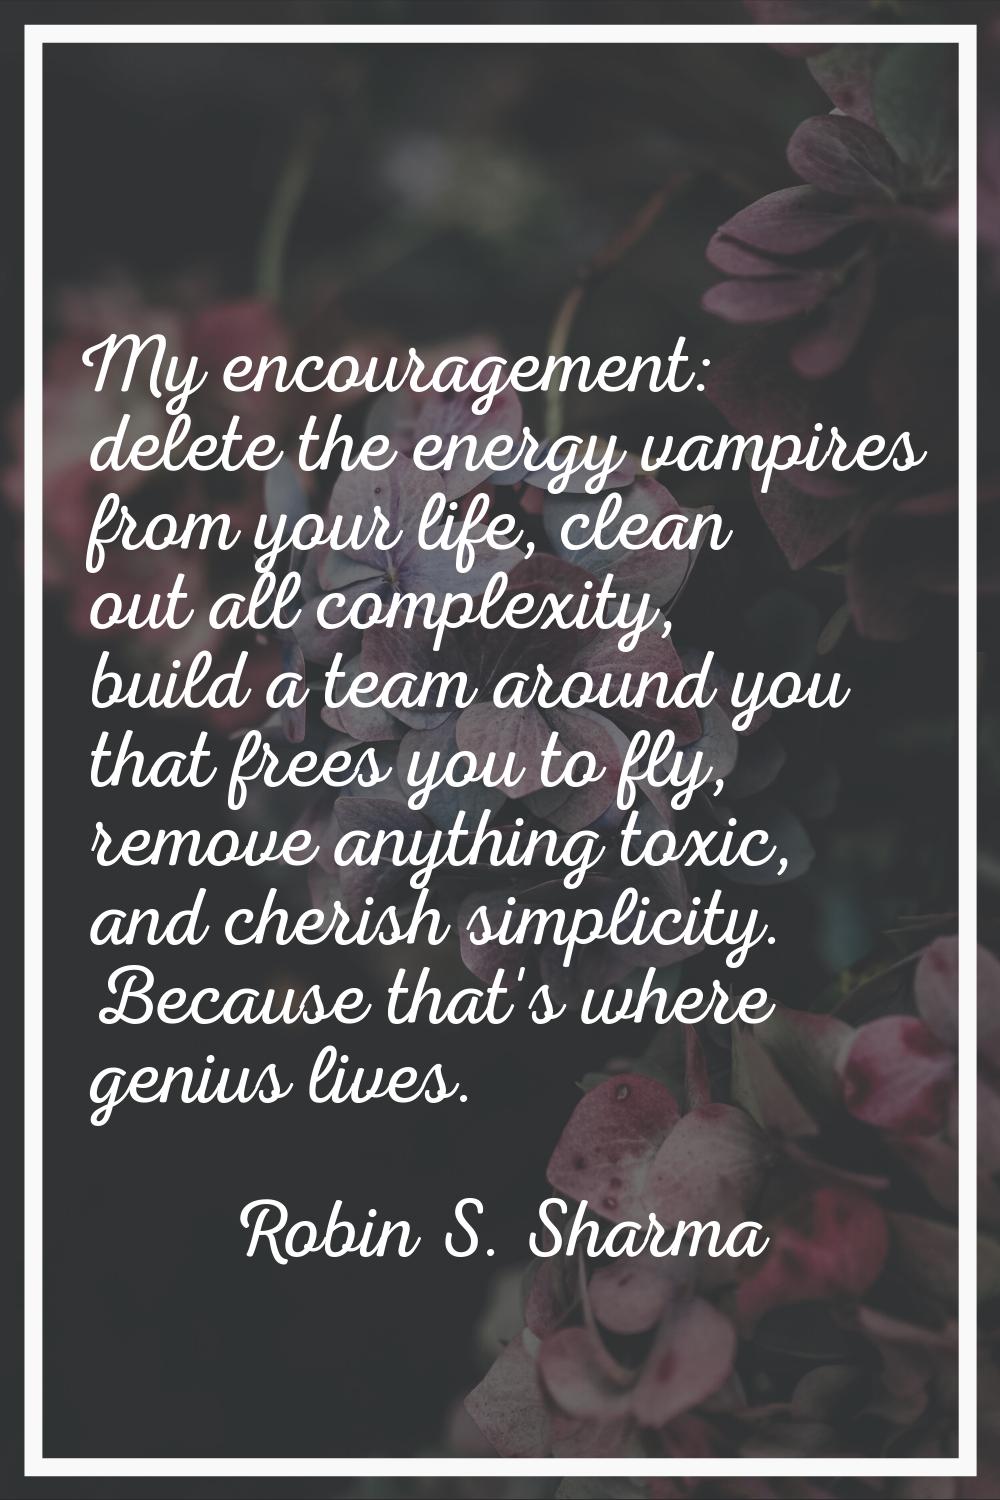 My encouragement: delete the energy vampires from your life, clean out all complexity, build a team